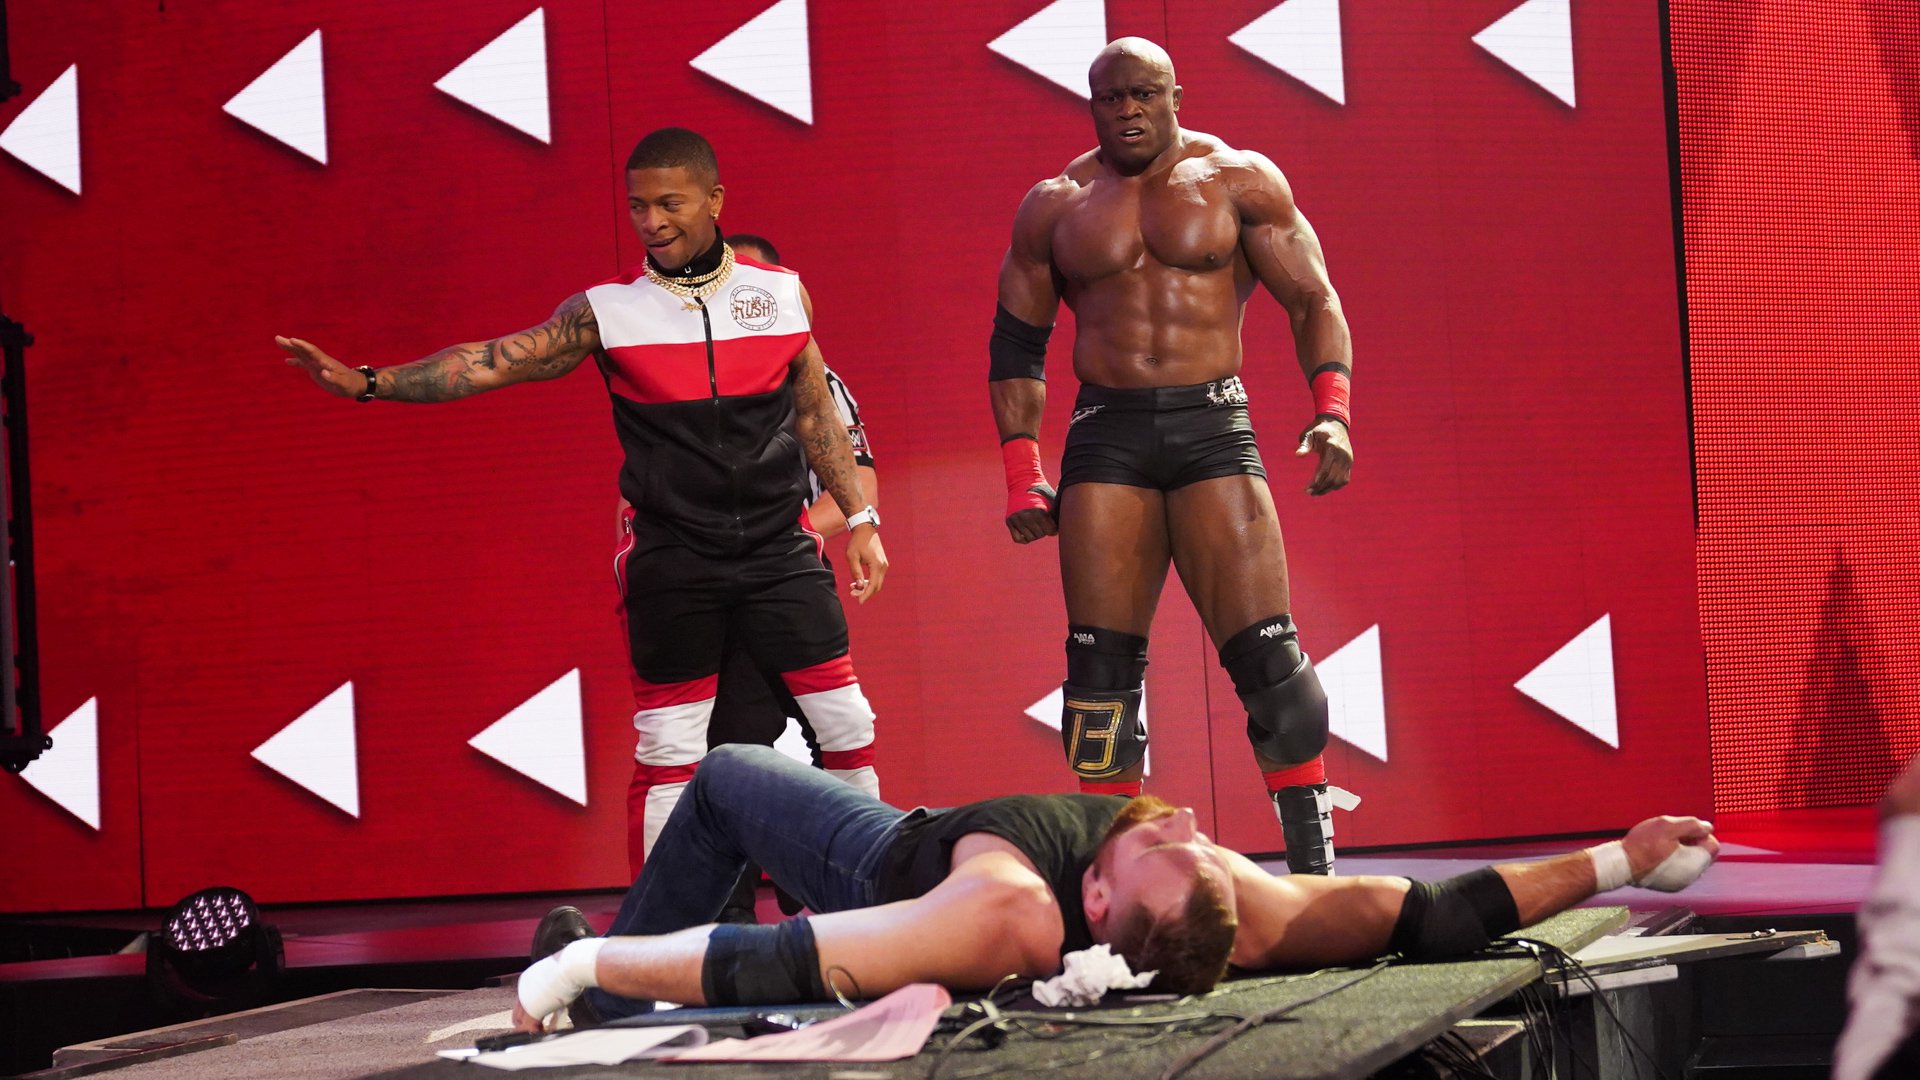 Bobby Lashley attacked Dean Ambrose in Ambrose’s final WWE match